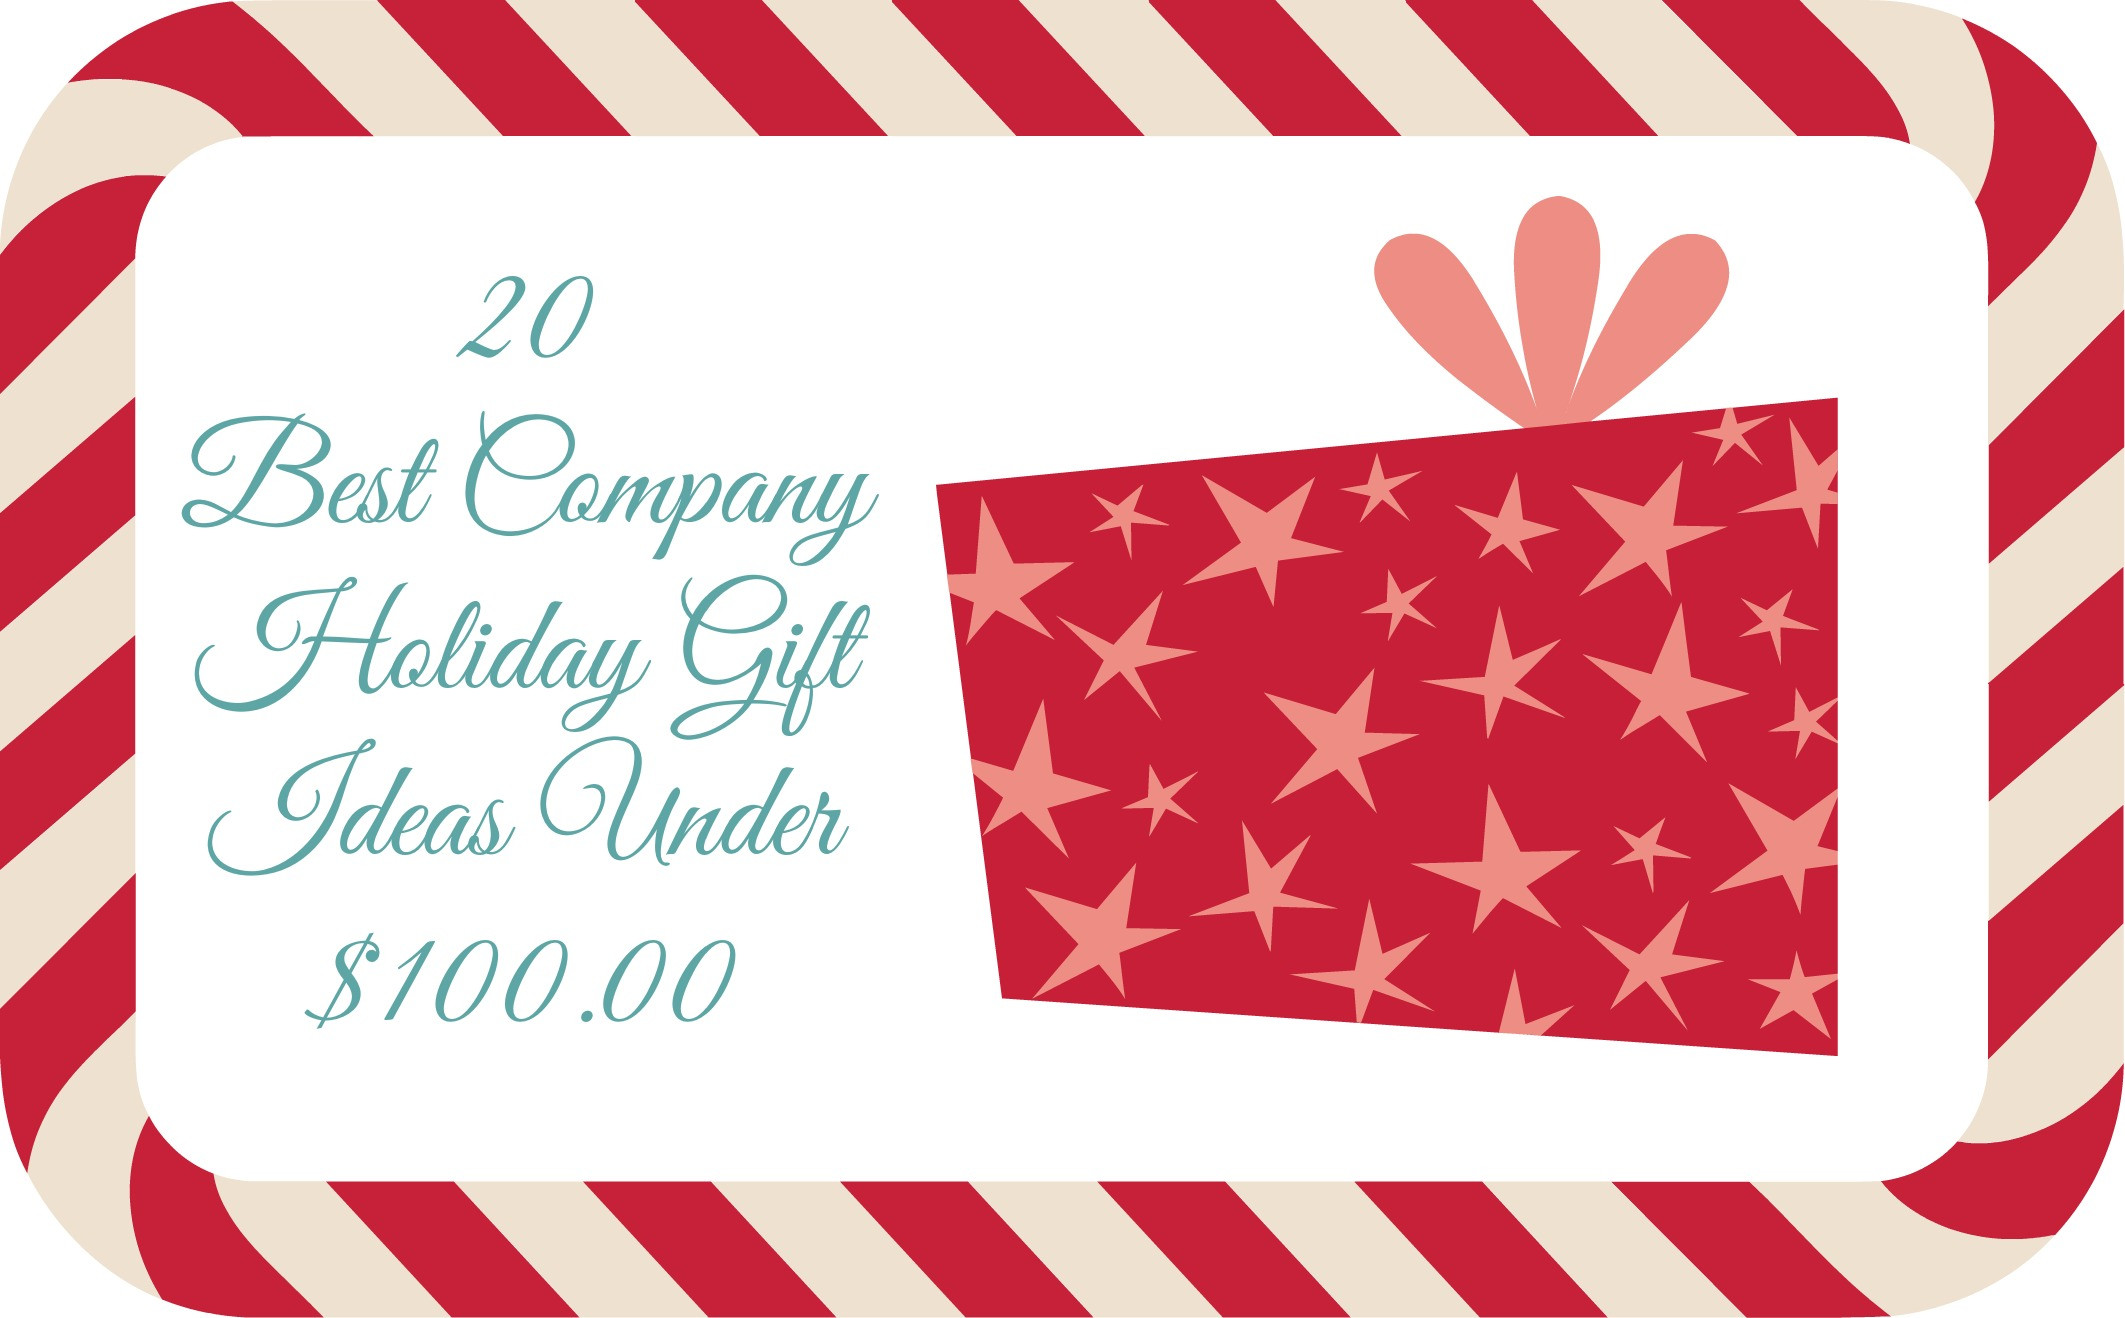 Company Christmas Party Gift Ideas
 20 Best pany Holiday Gift Ideas Under $100 00